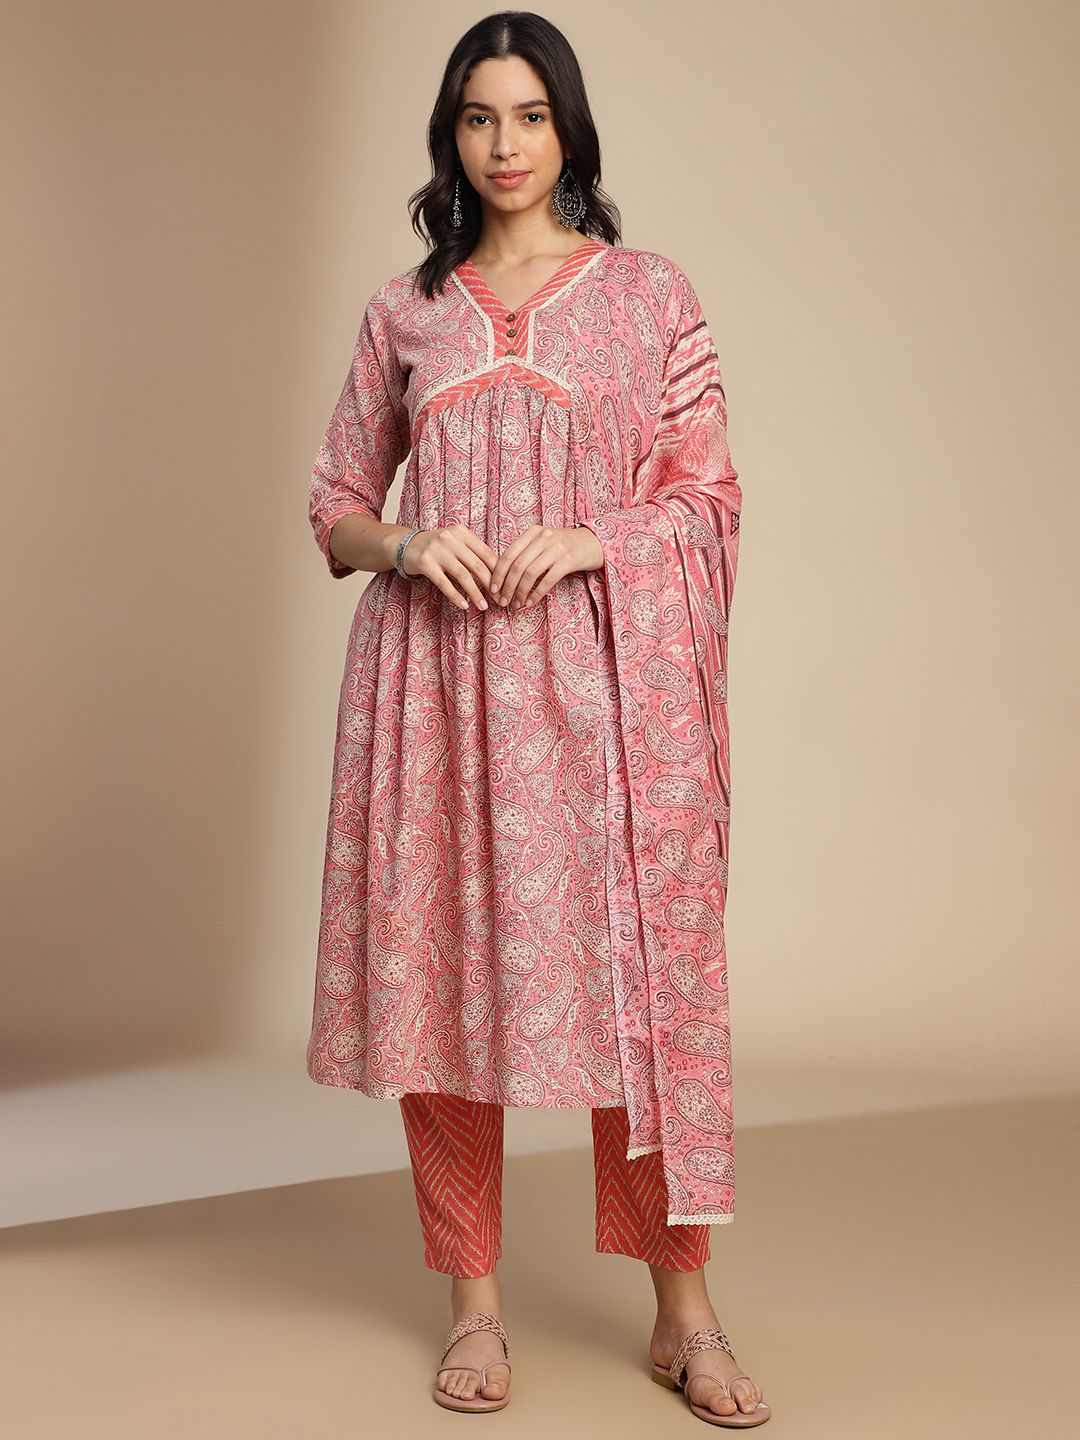     			Hritika Cotton Blend Printed Kurti With Pants Women's Stitched Salwar Suit - Pink ( Pack of 1 )